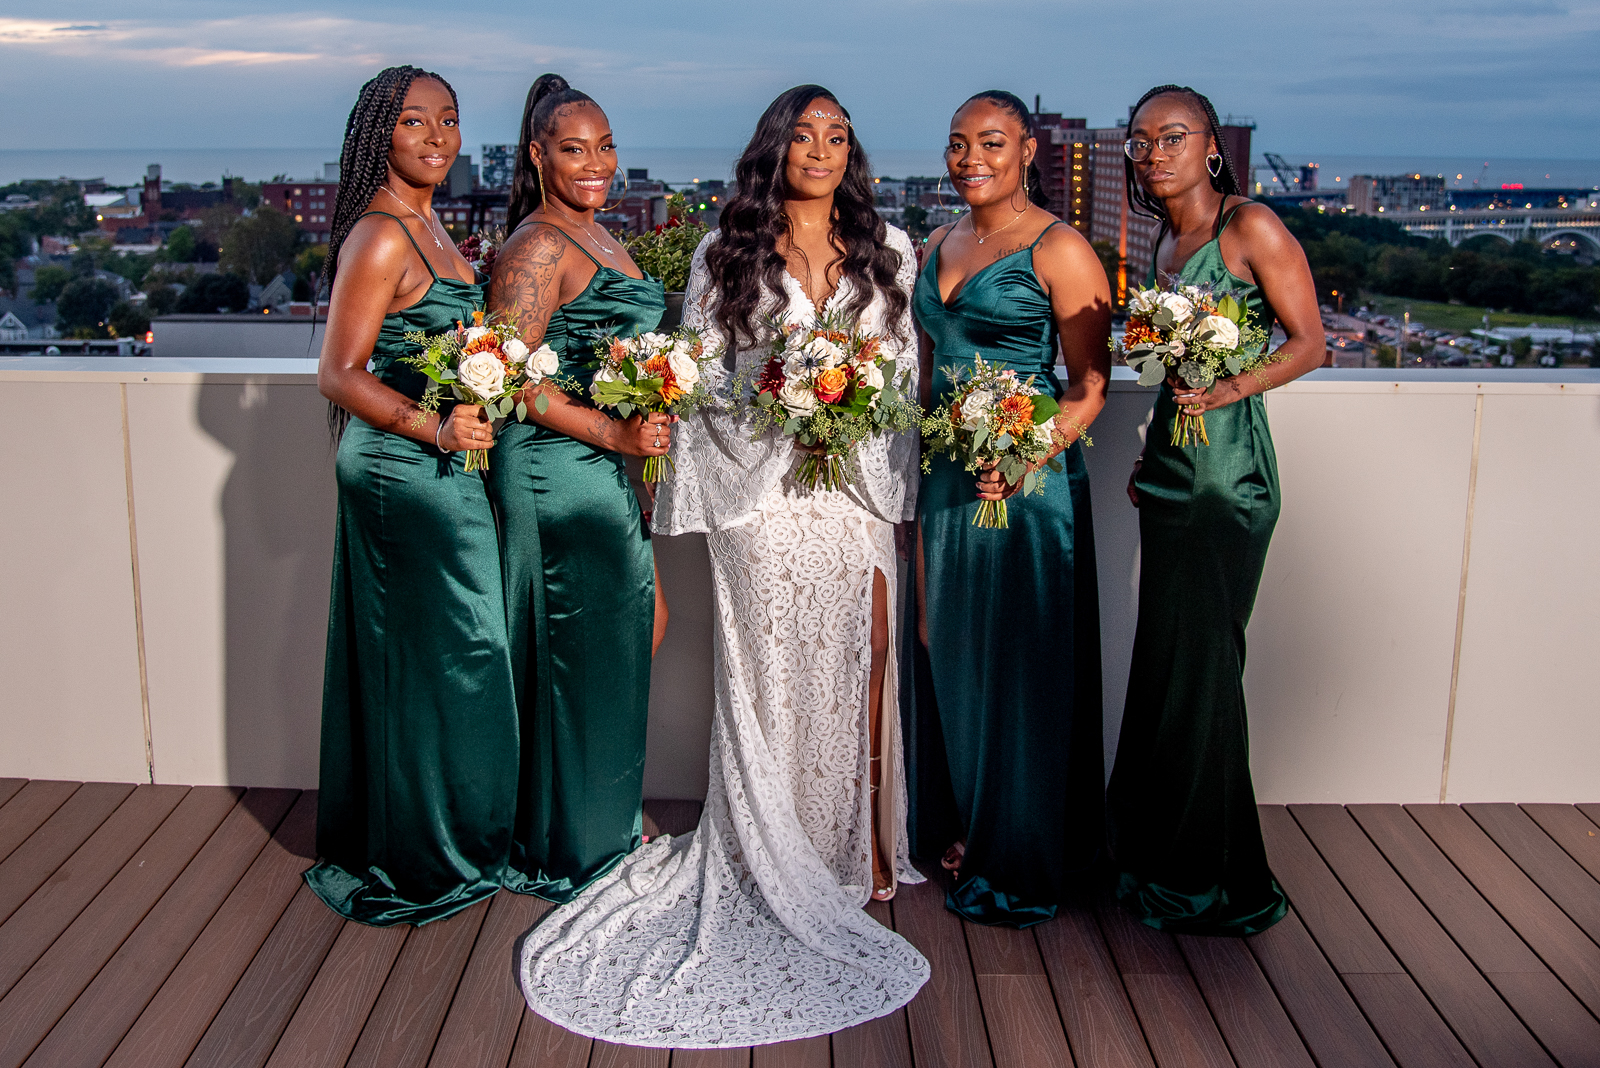 Bride with bridesmaids, bridal party portrait, African American bride, African American wedding, night photography, night wedding photo, downtown Cleveland skyline, Lake Erie, urban wedding ceremony at Penthouse Events, Ohio City, Cleveland Flats